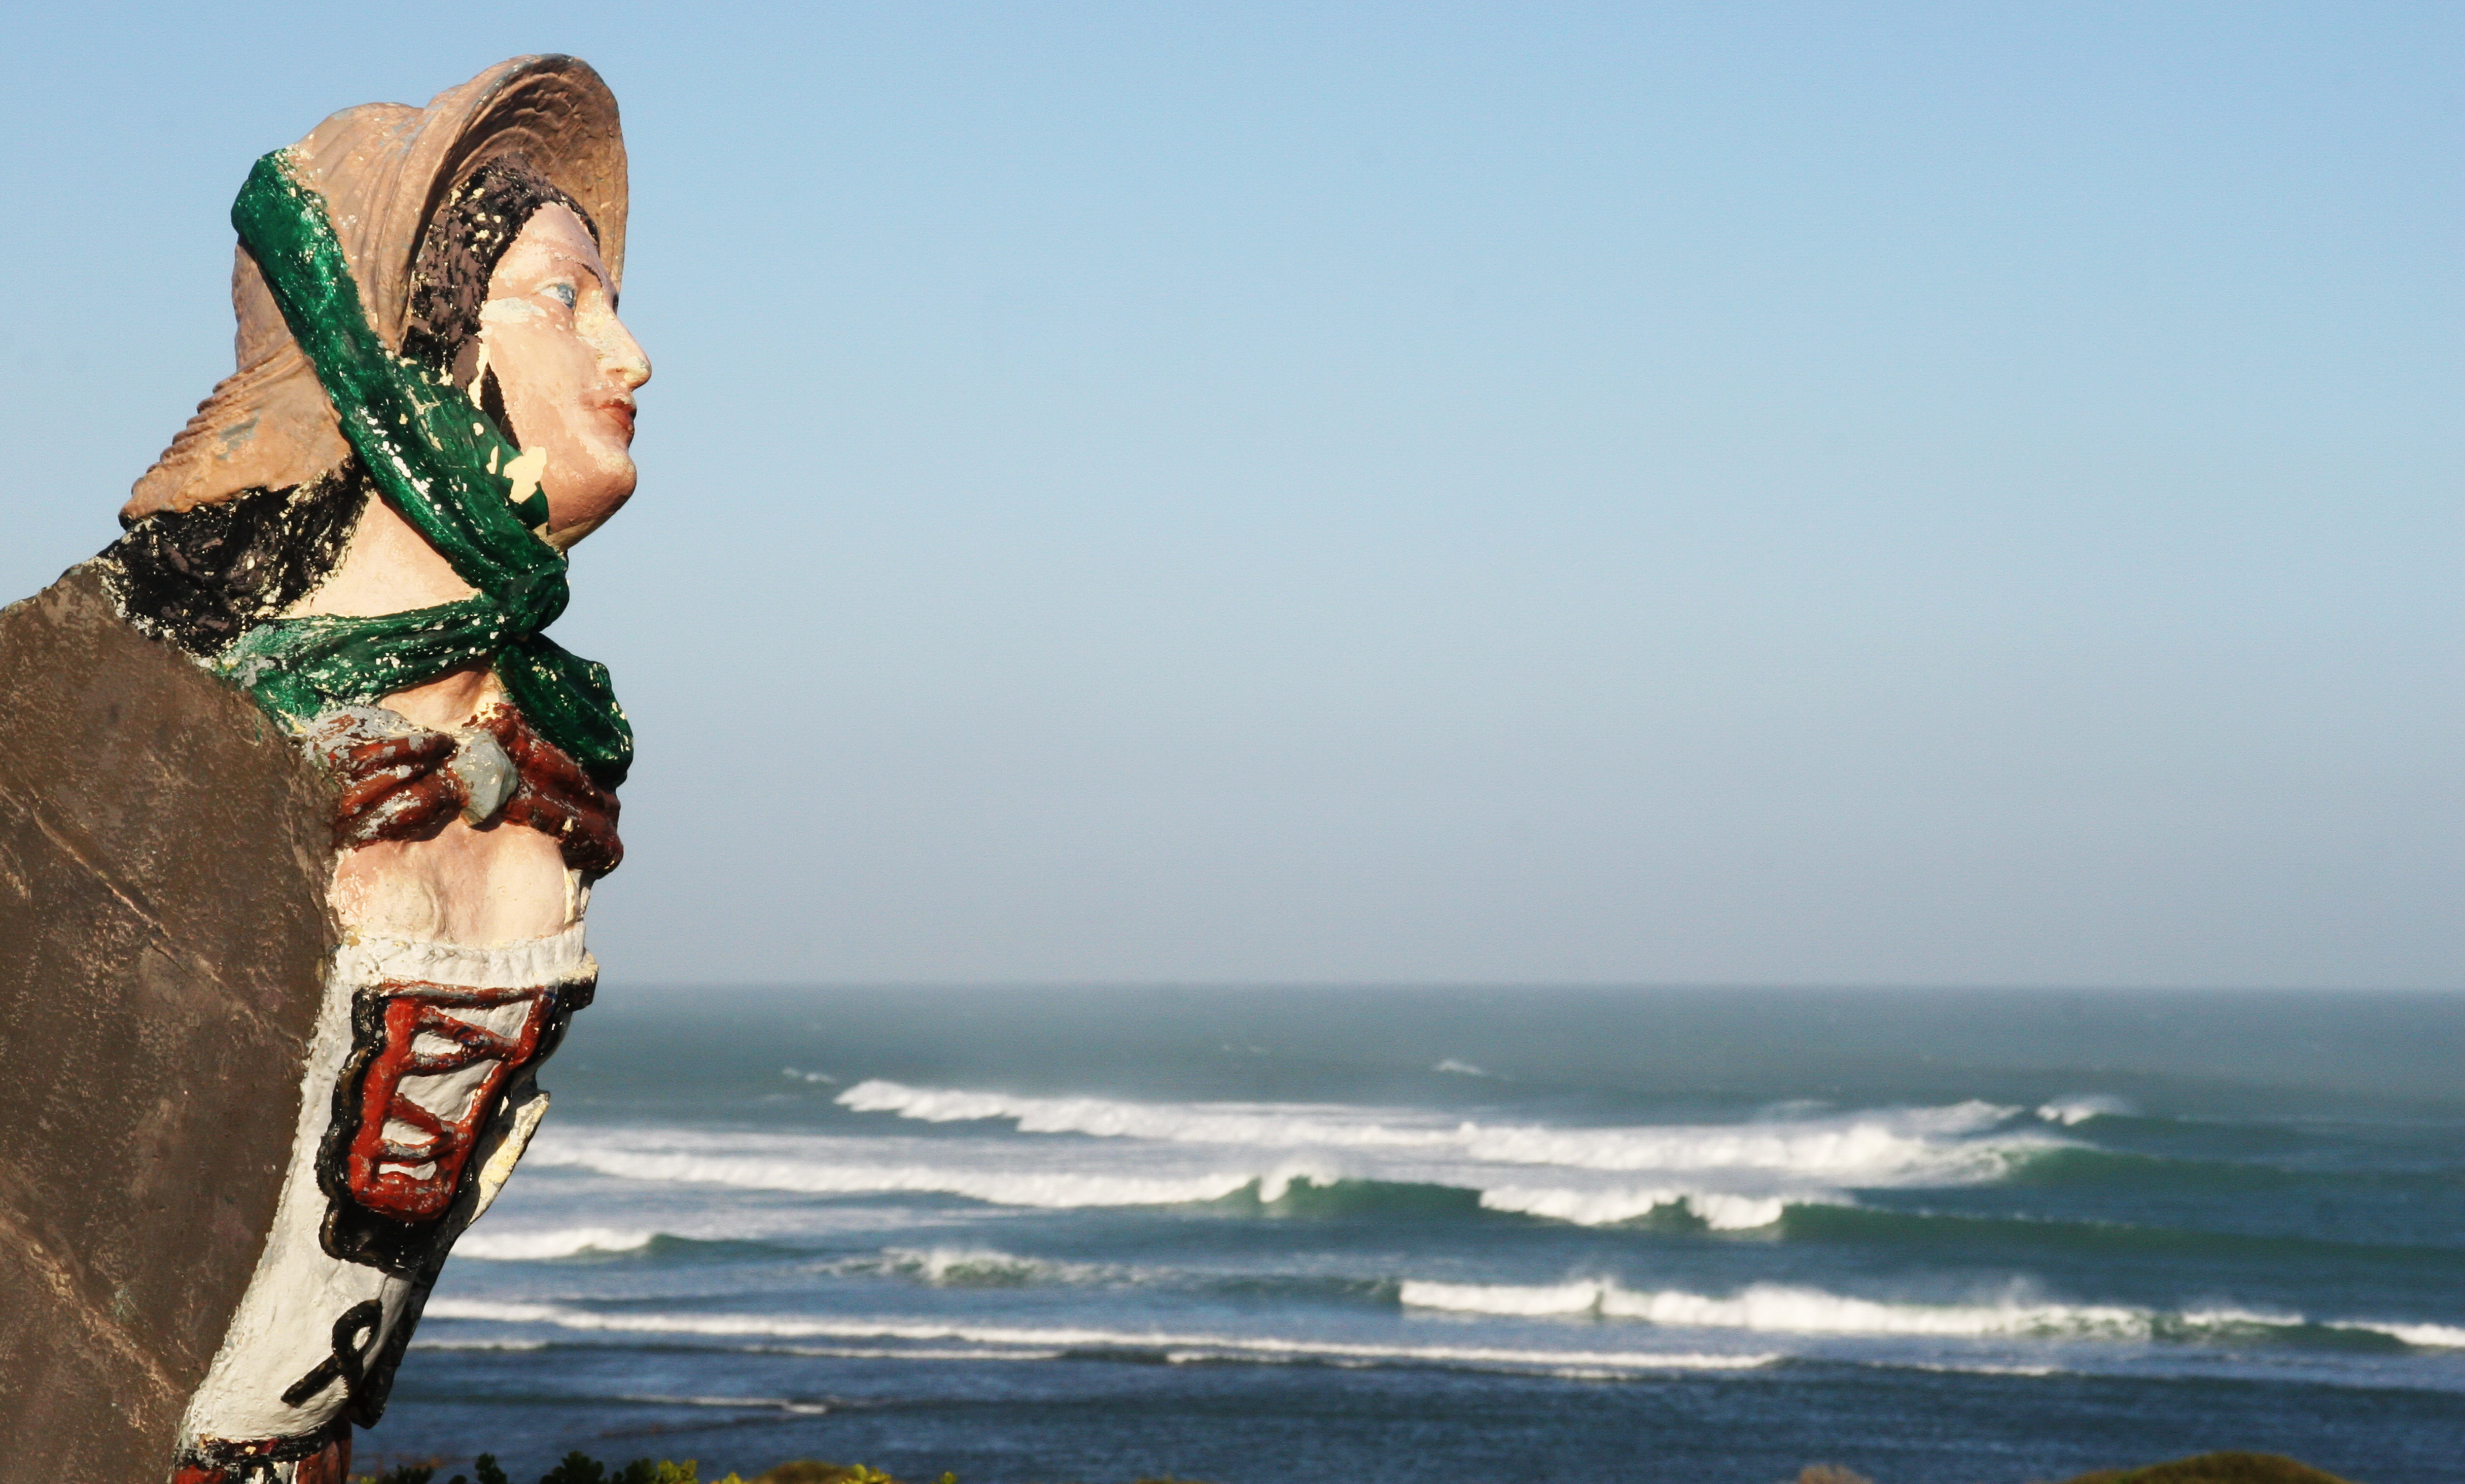 The so-called Wooden Lady of Agulhas is figurehead from the Marie Elise, wrecked at Agulhas in 1877 and washed ashore close to the present-day lighthouse. Photographer: Chris Marais